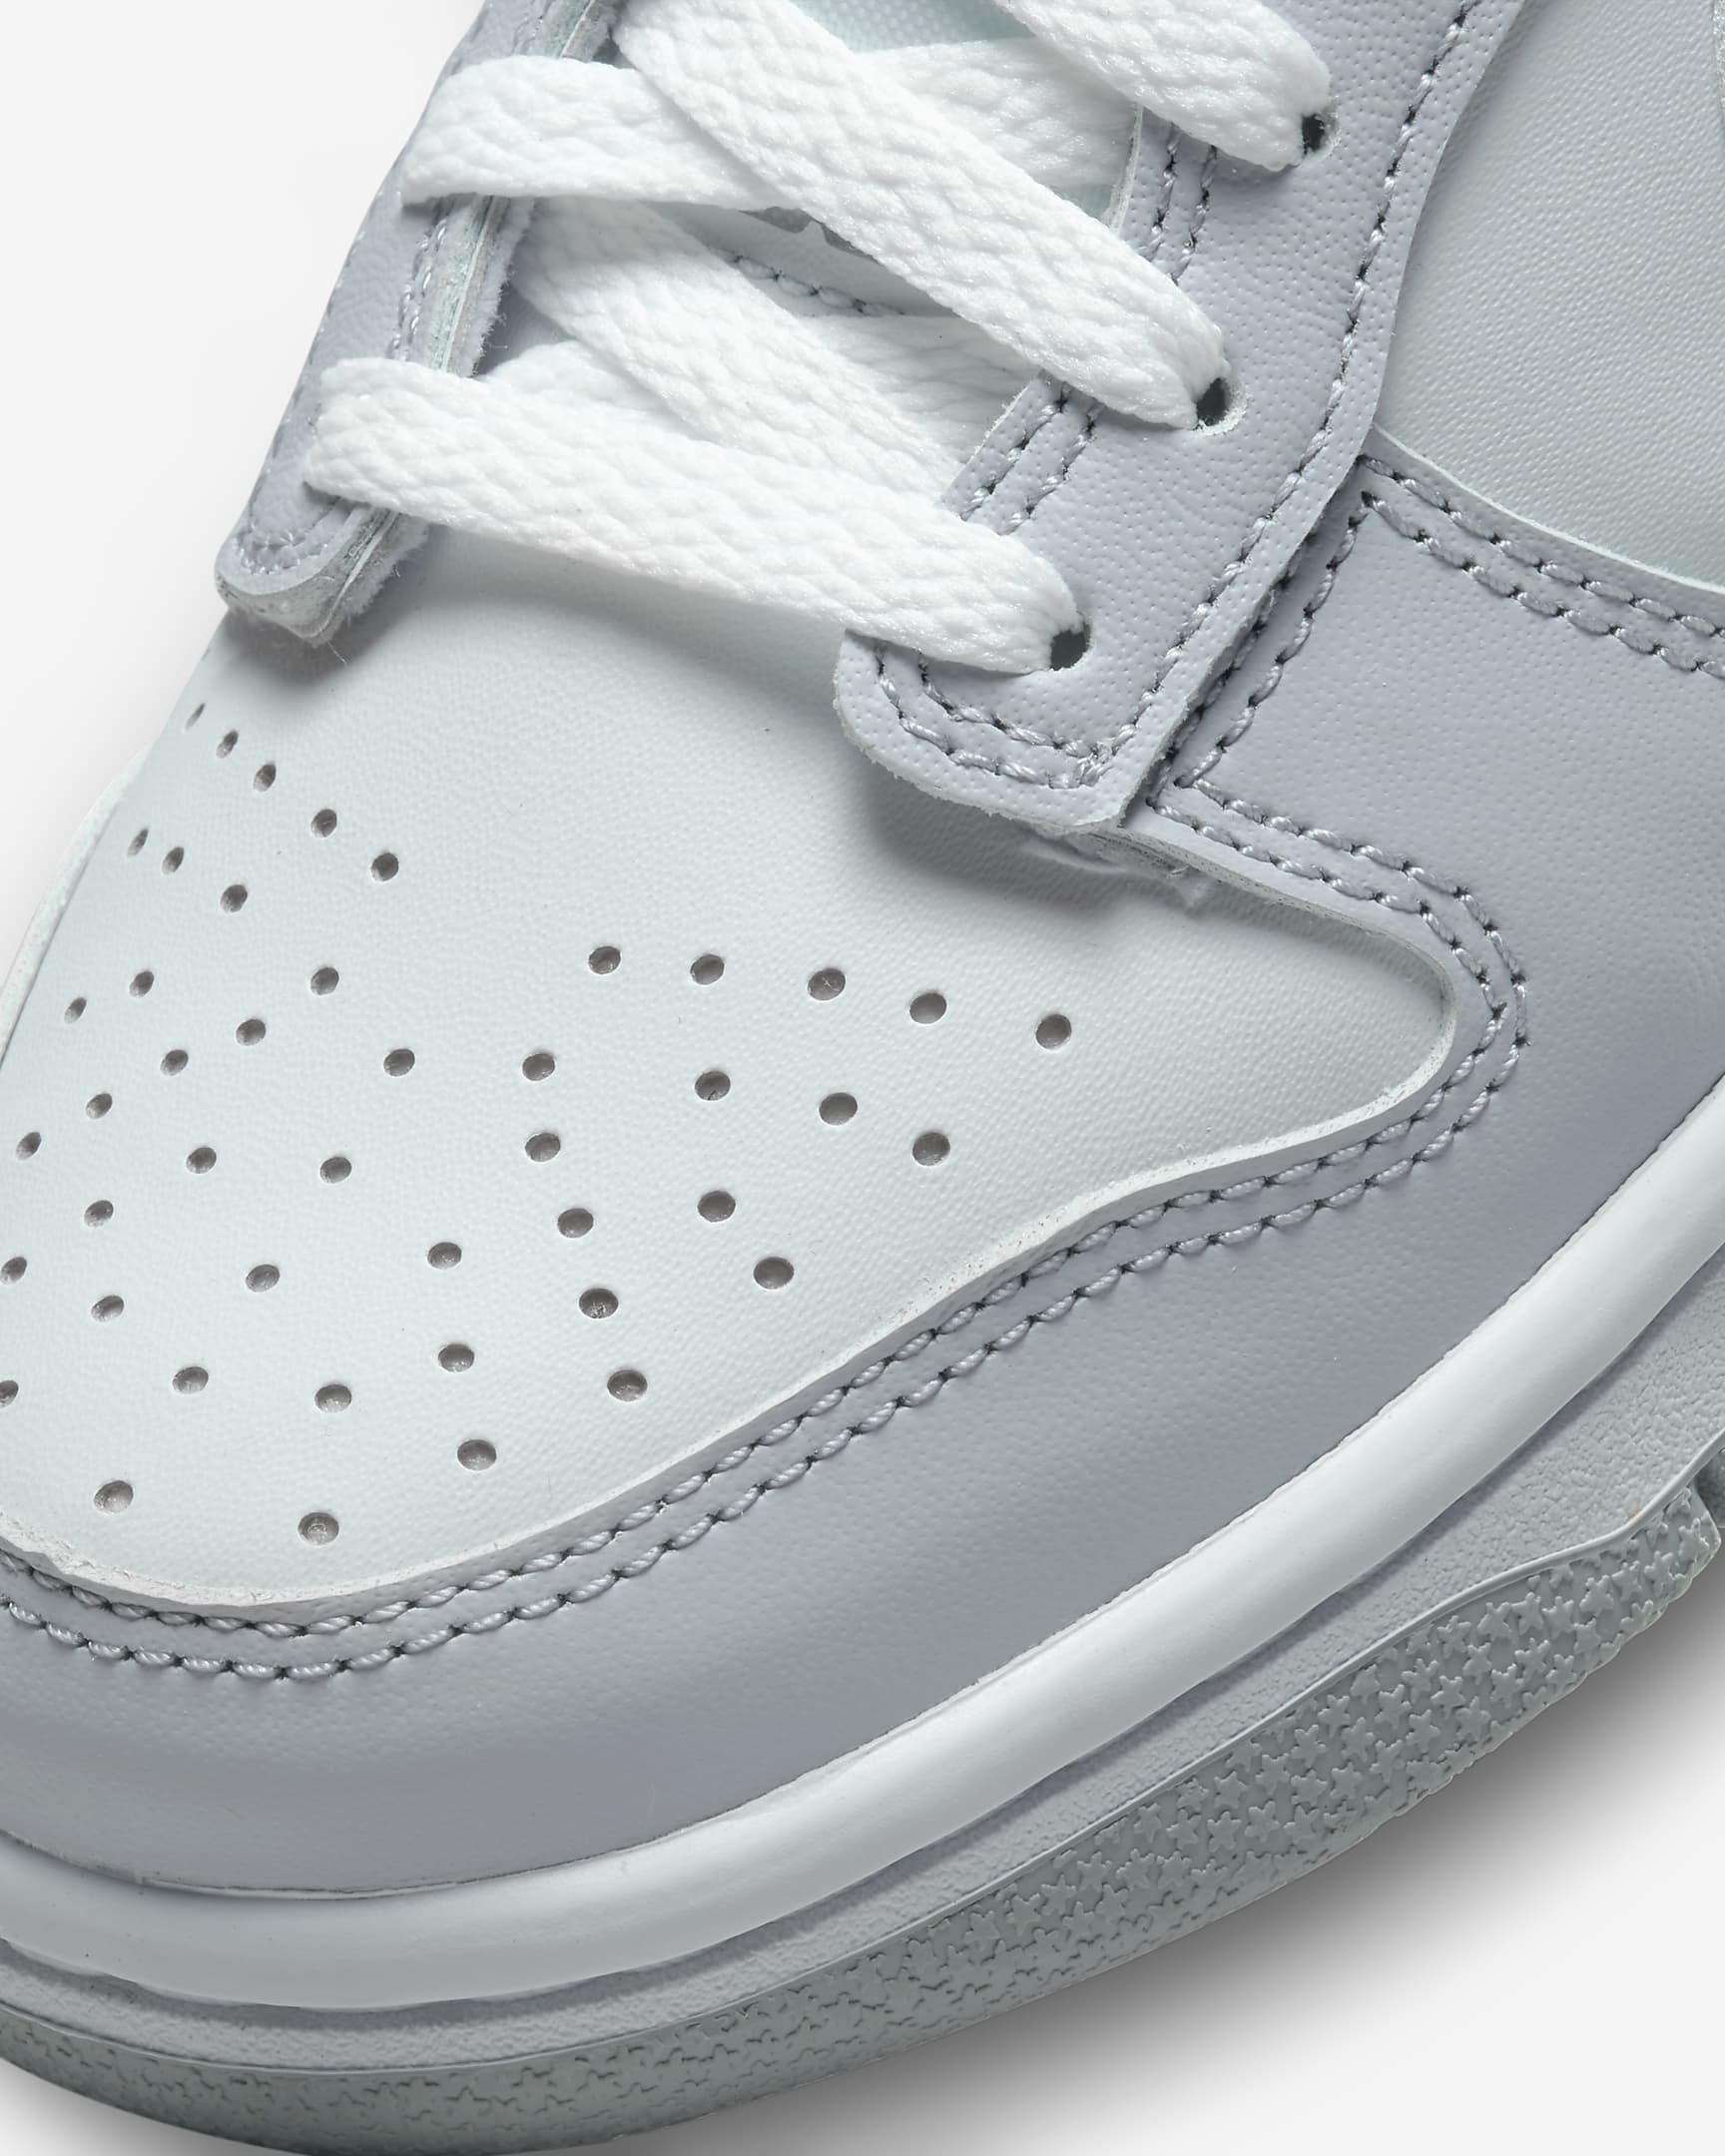 Nike Dunk Low Big Kids' Shoes - Pure Platinum/Wolf Grey/White